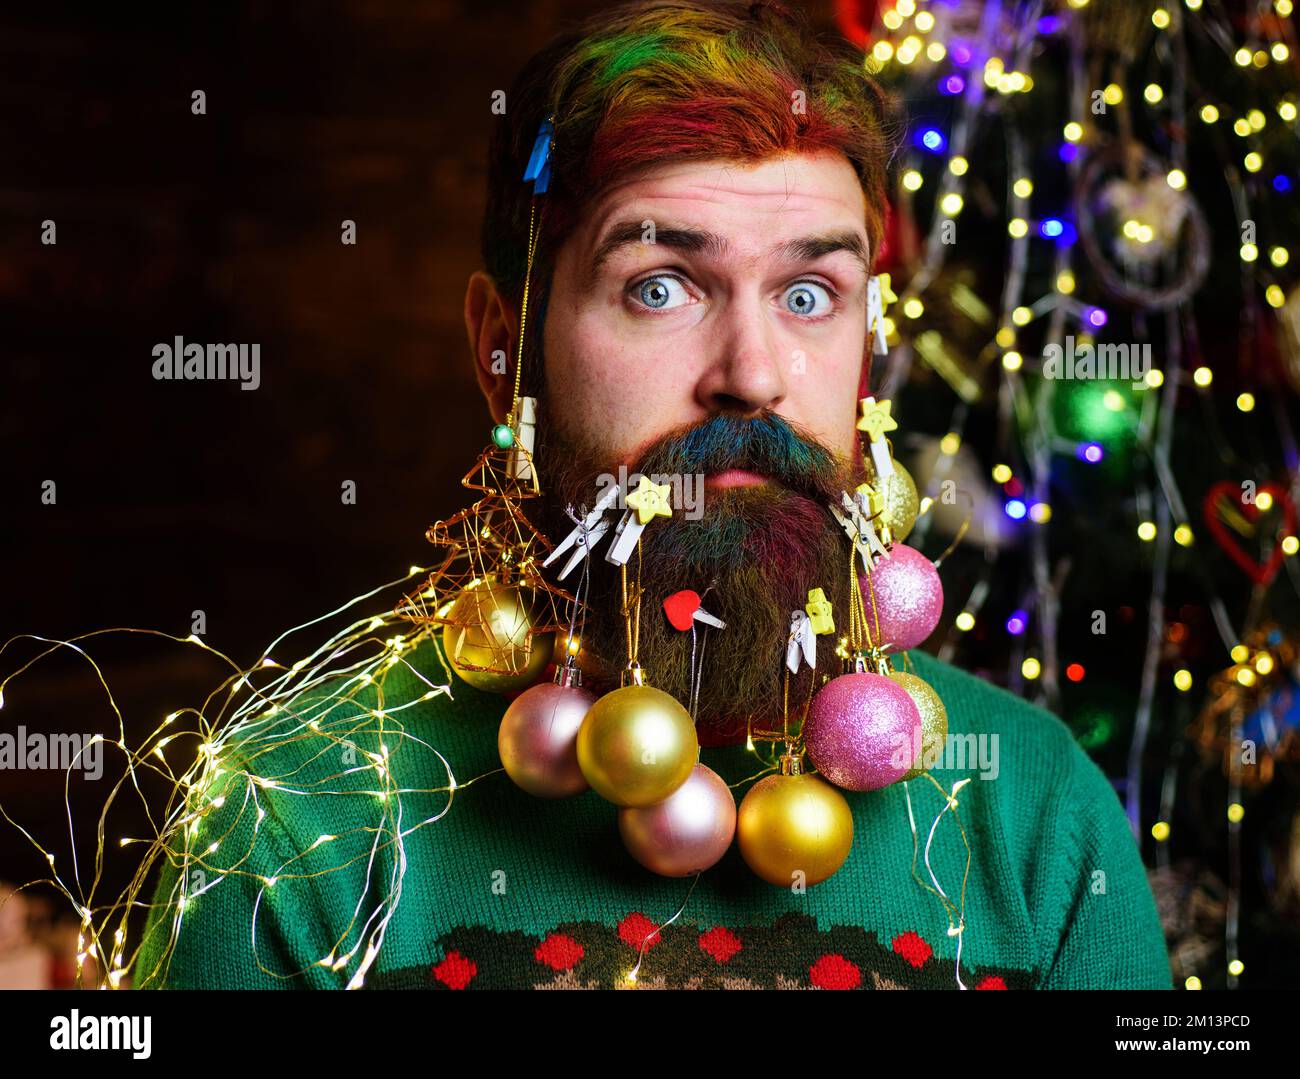 New year party. Surprised bearded man with Christmas beard decorations and dyed hair Stock Photo